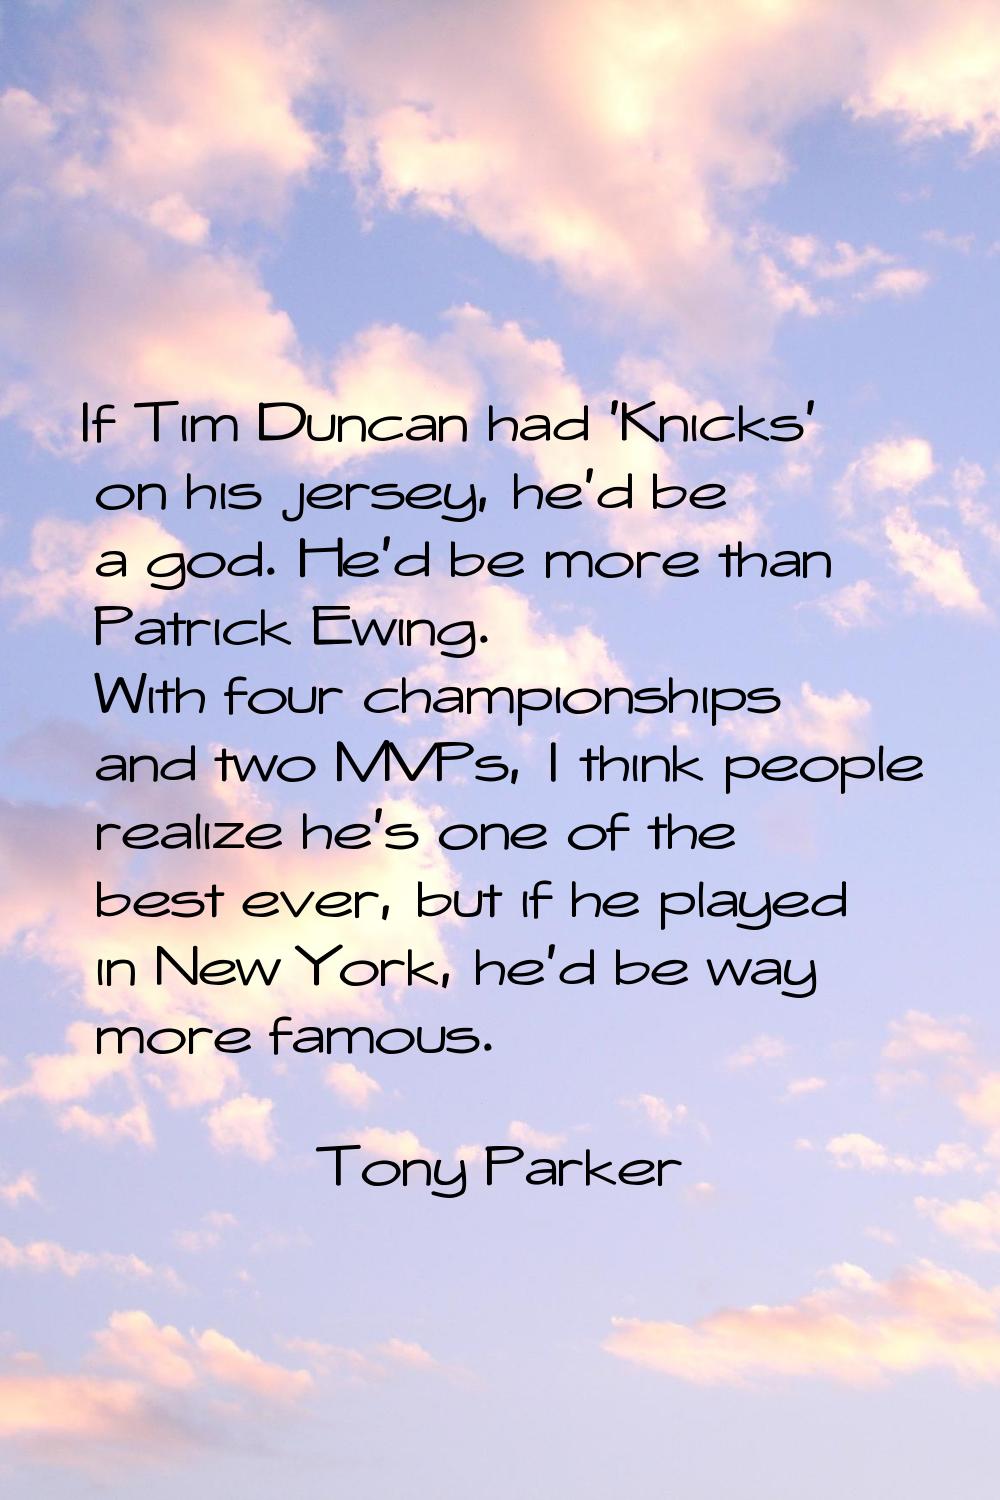 If Tim Duncan had 'Knicks' on his jersey, he'd be a god. He'd be more than Patrick Ewing. With four